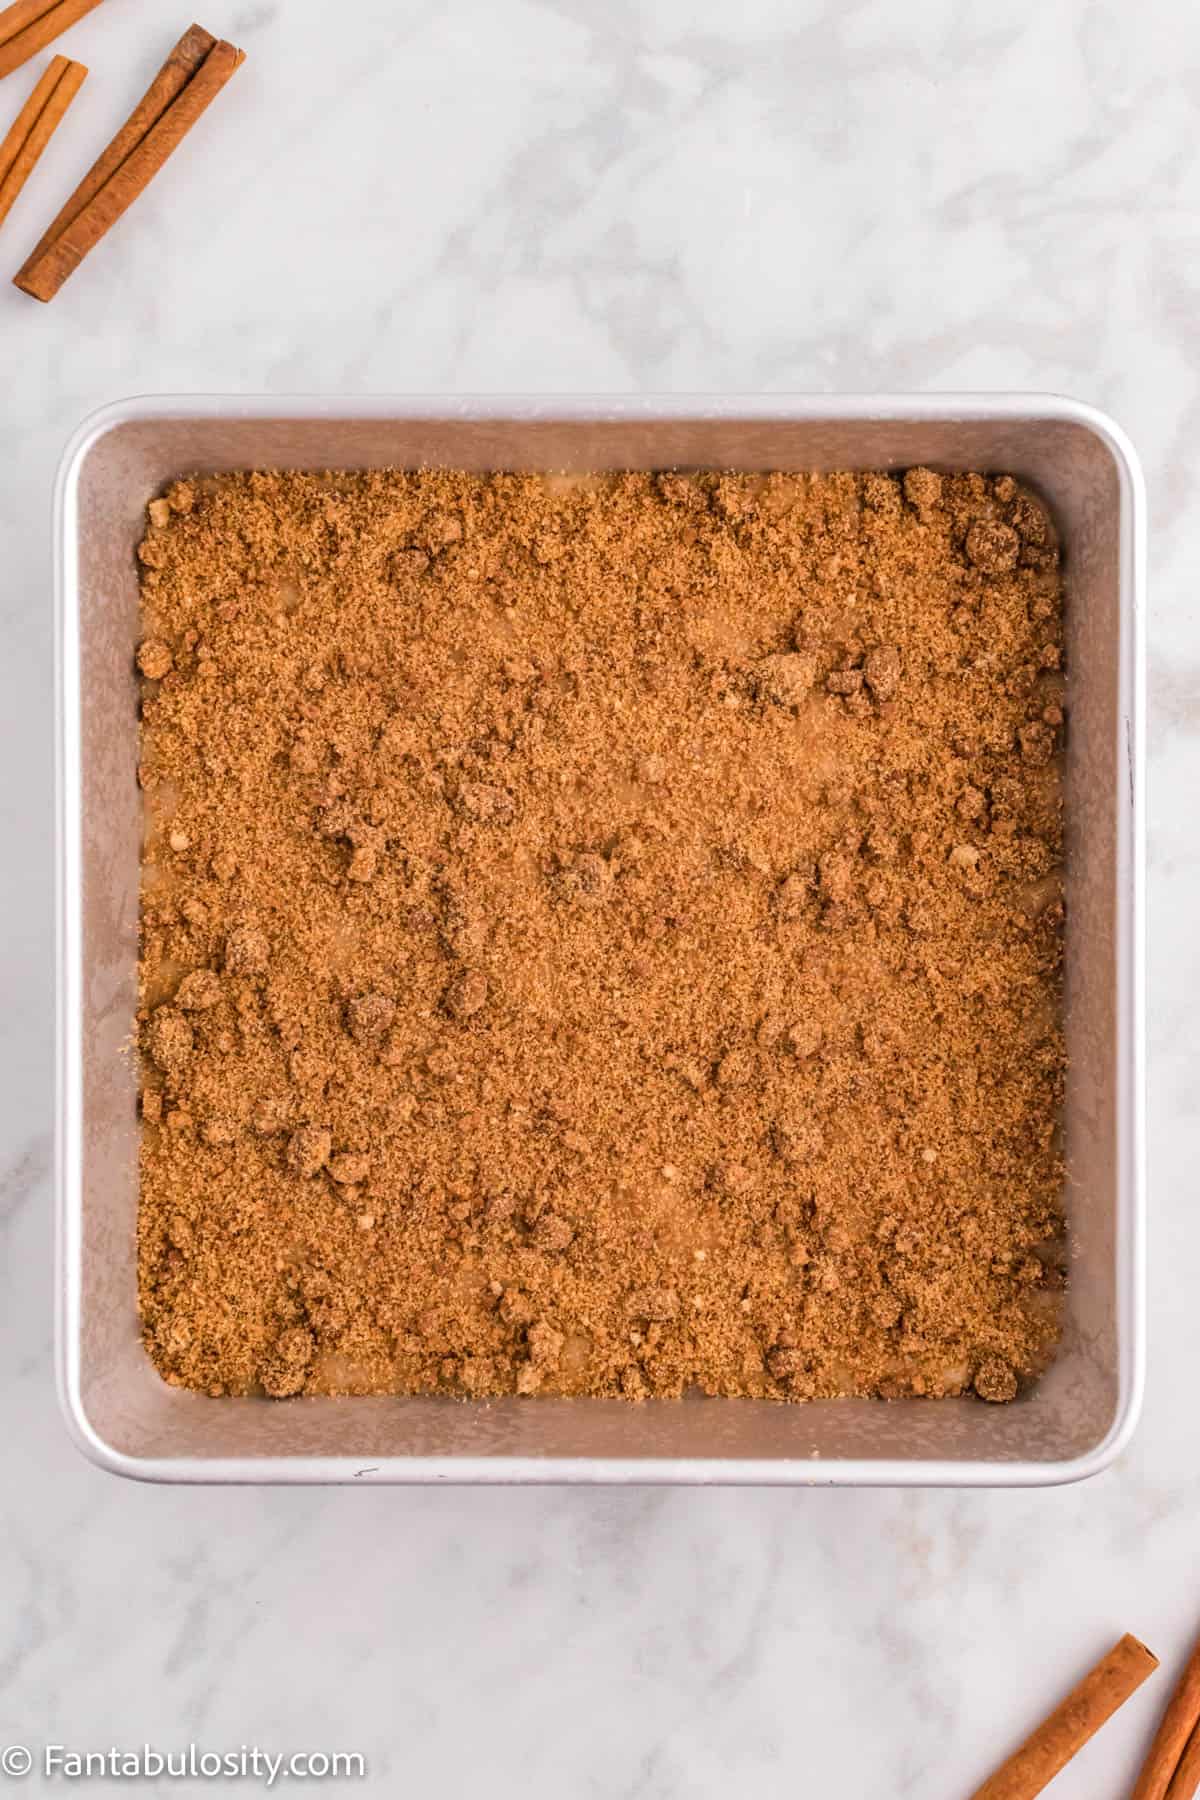 A cake pan is in the center of the photo displaying the cinnamon streusel topping on the top of a Cinnamon Coffee Cake